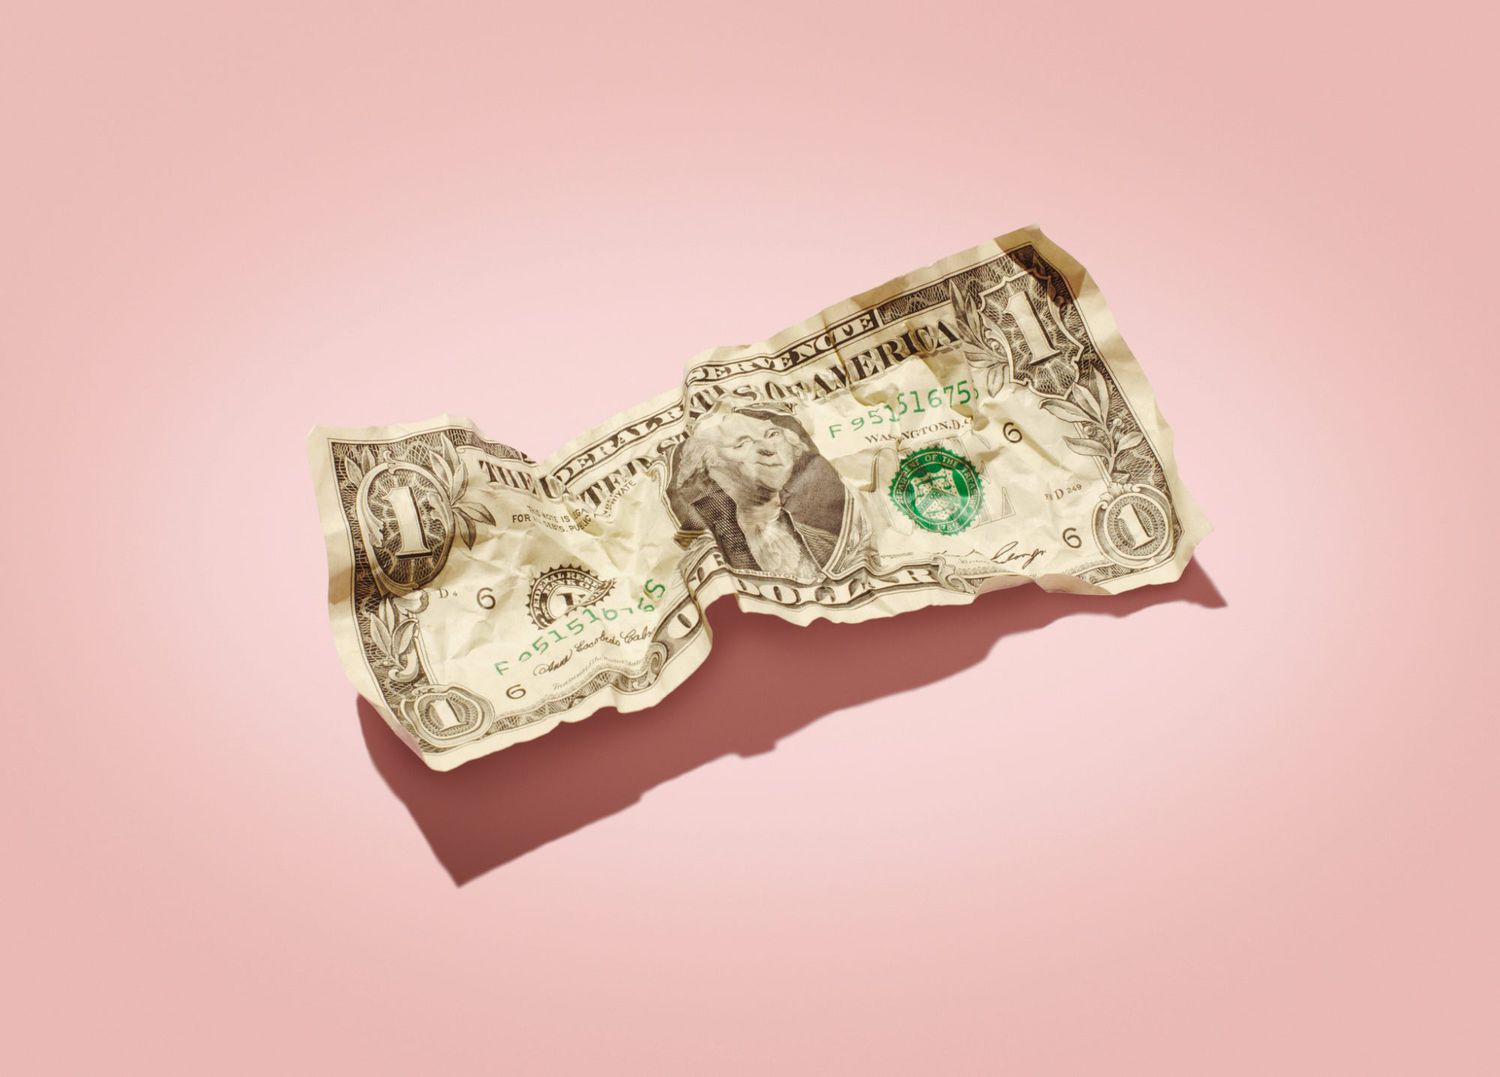 An image of a crumpled dollar bill on a pink background.